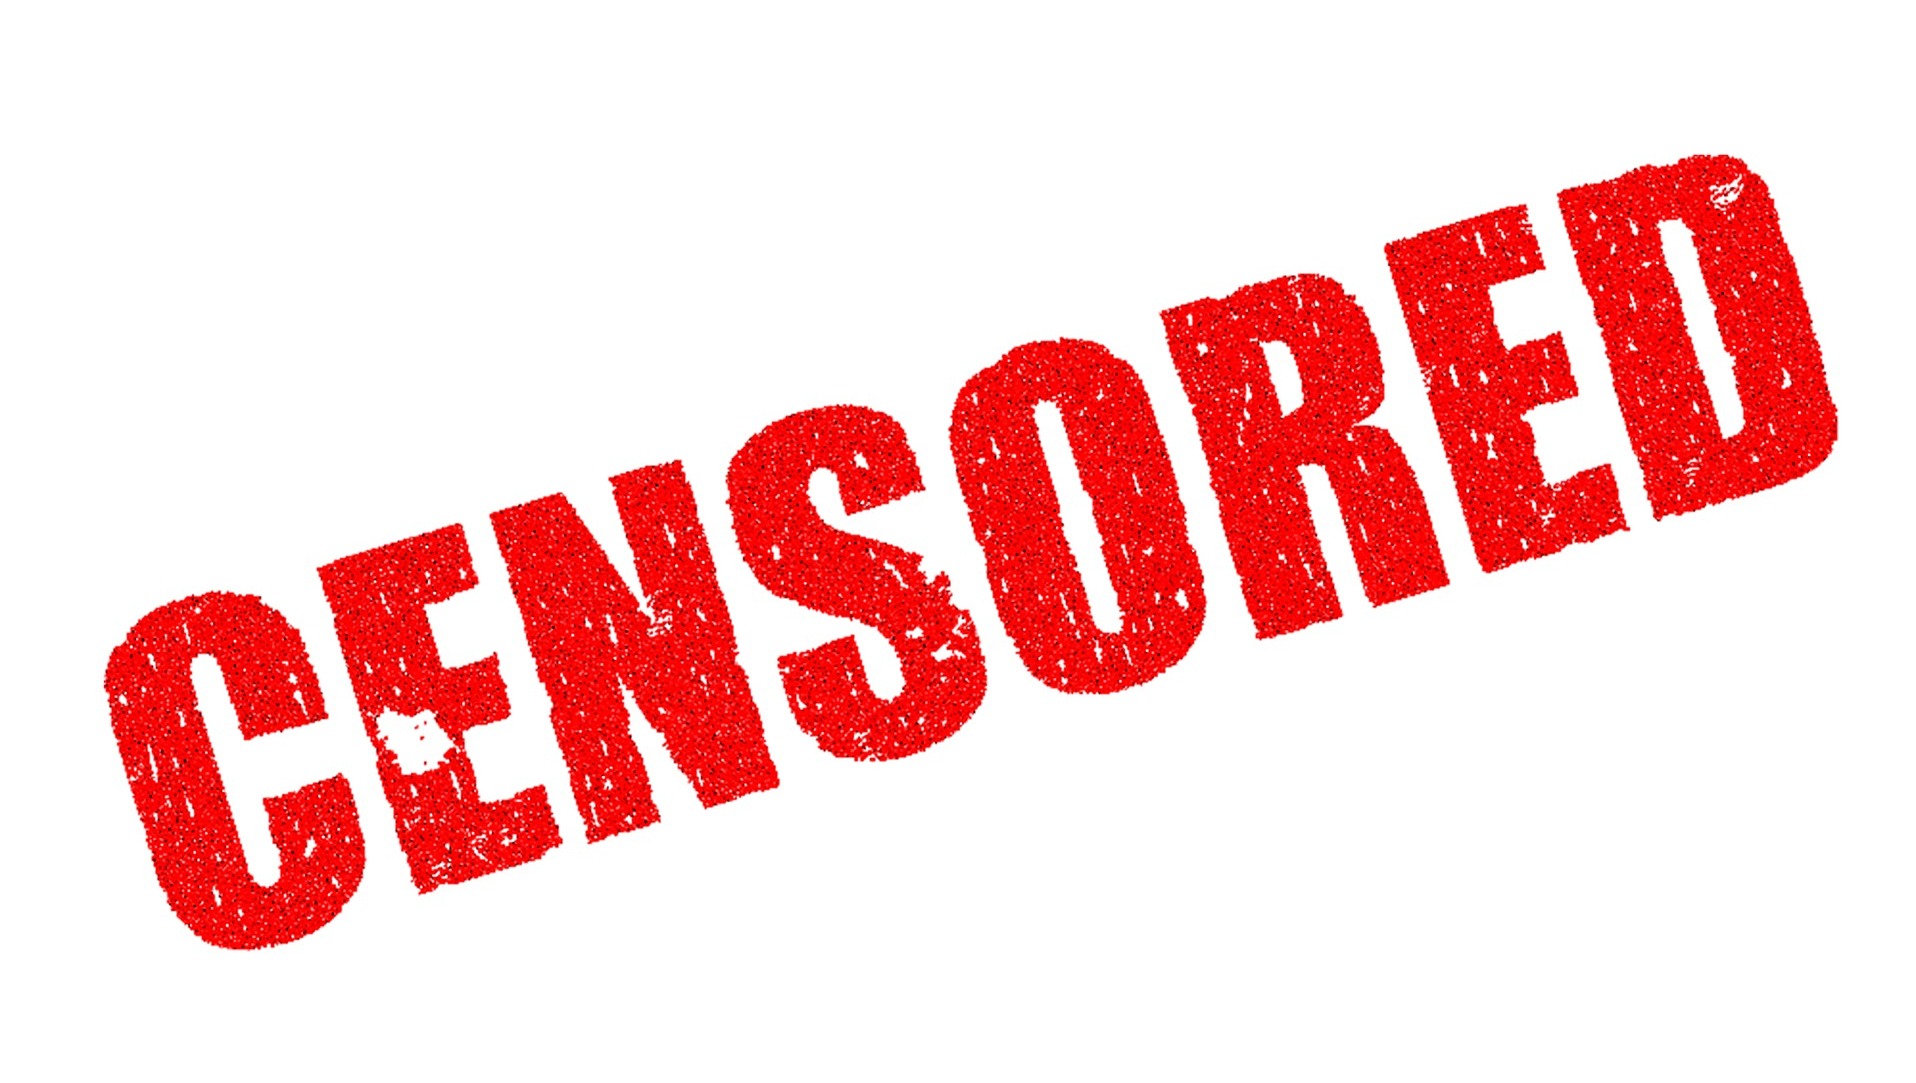 The word censored in bright red letters